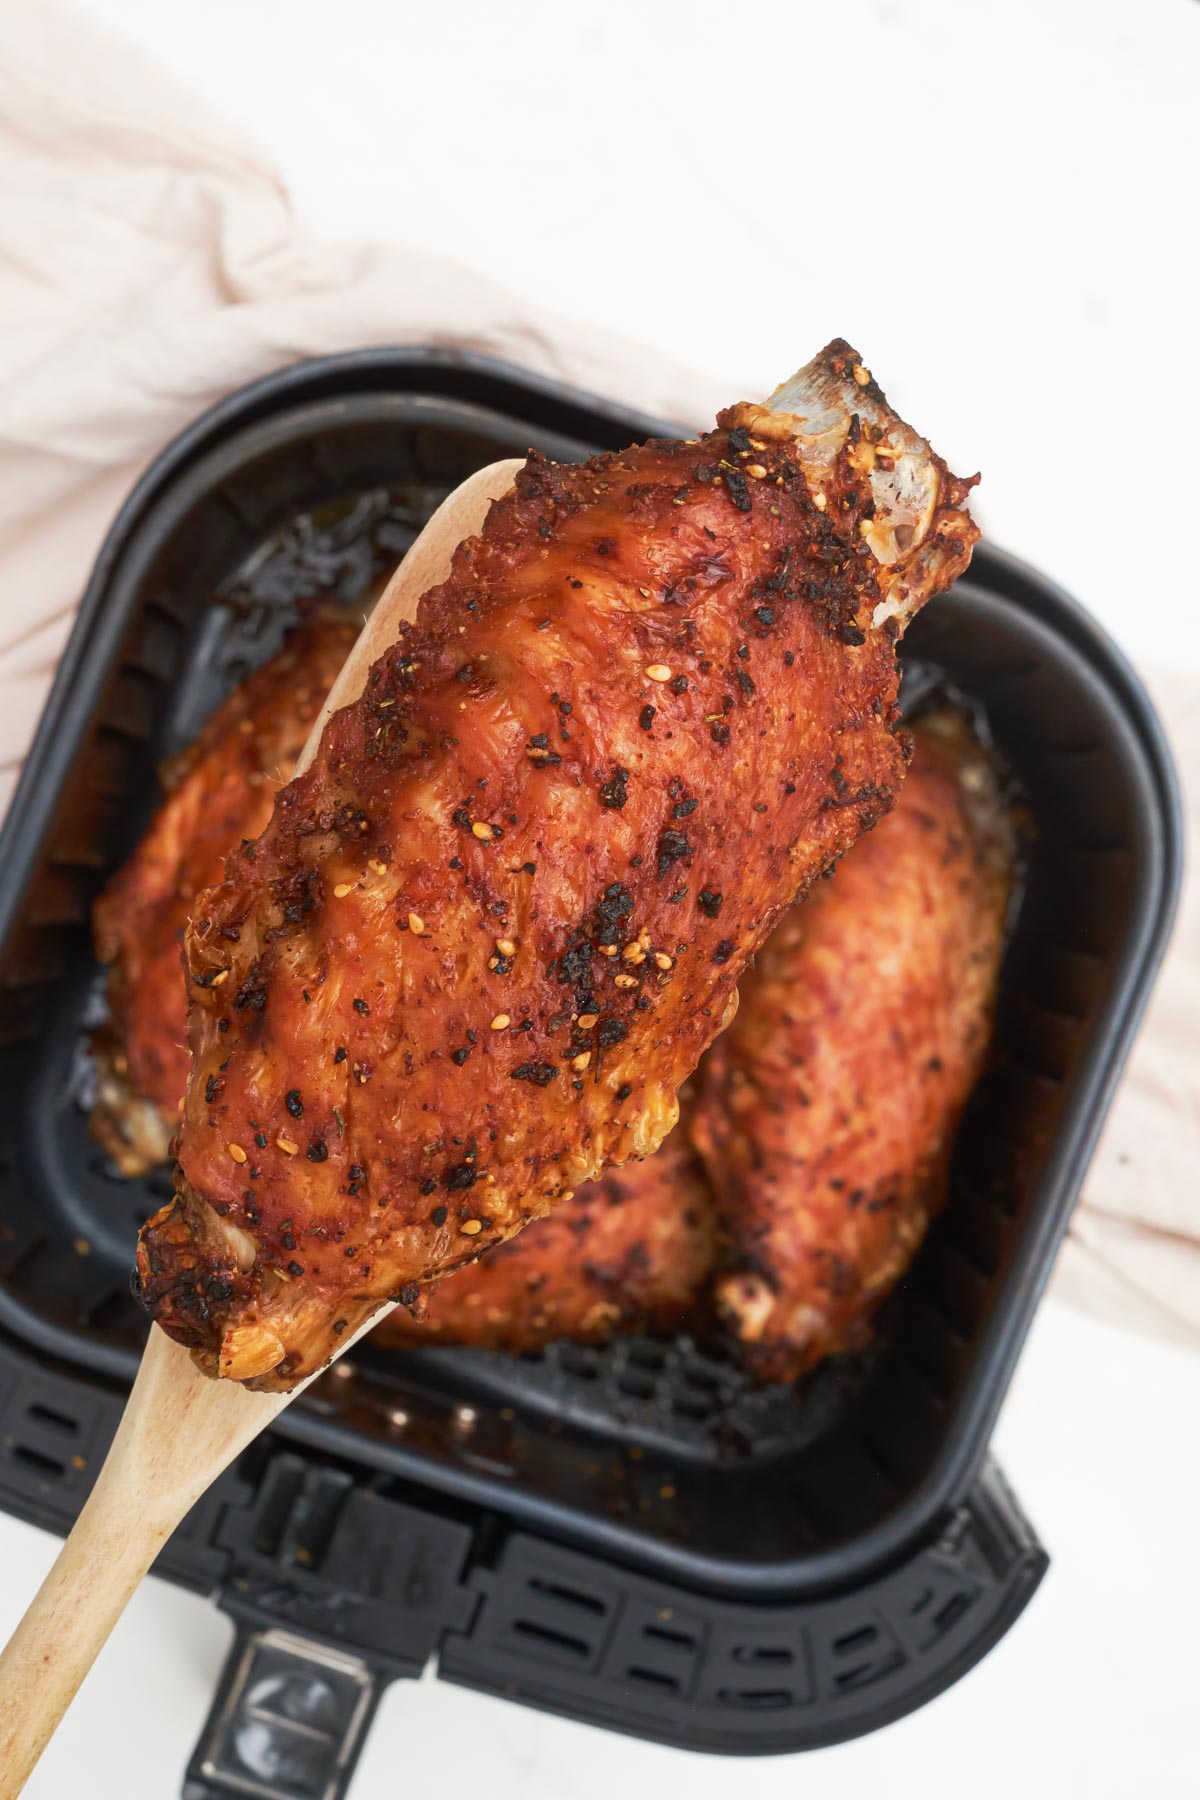 one cooked turkey wing being removed from the air fryer